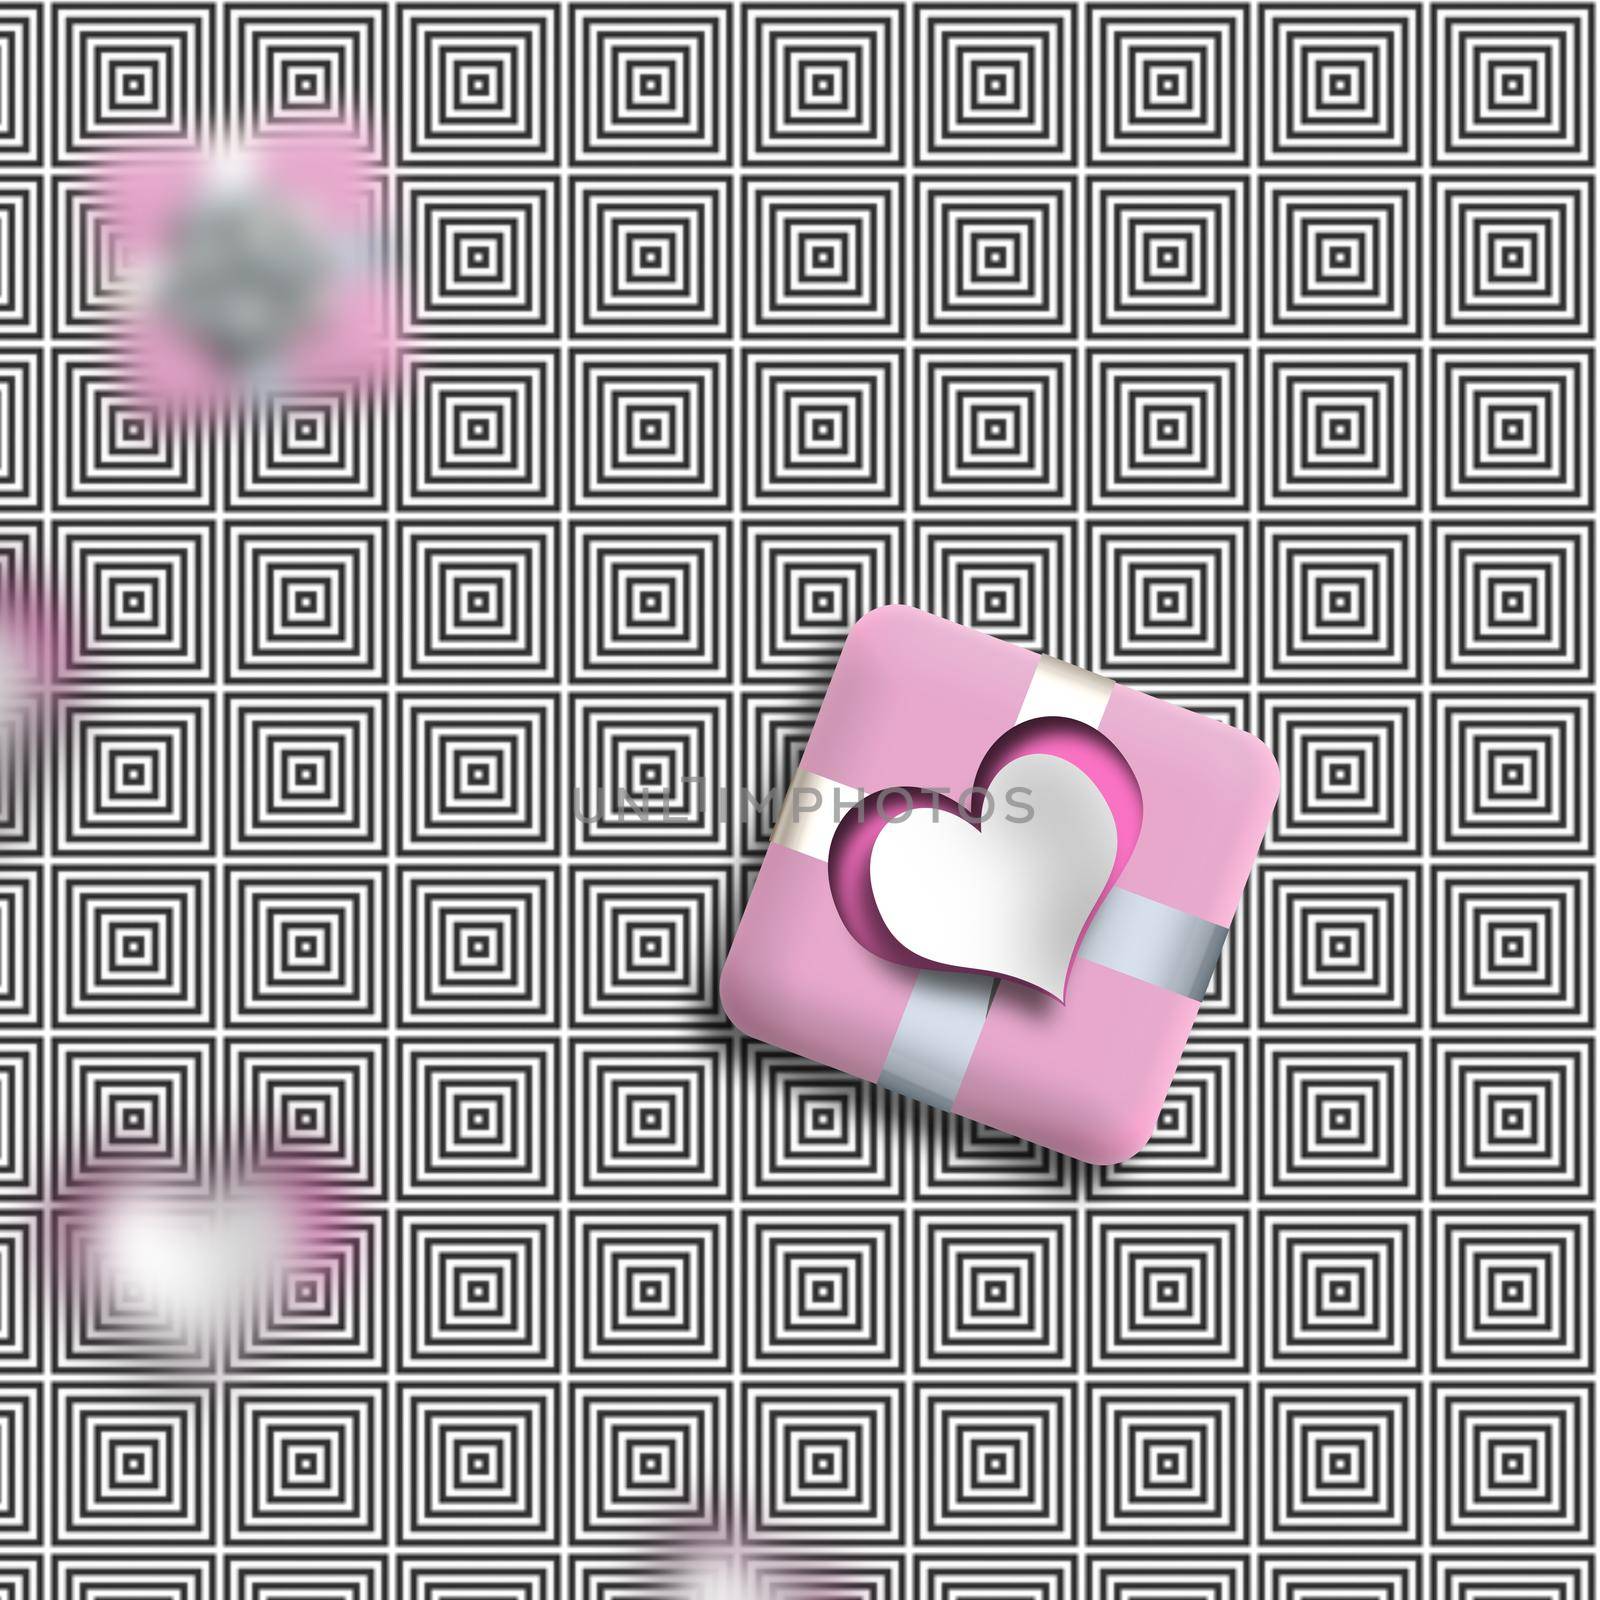 Contemporary Valentines card with pink heart, gift box on grey abstract background. 3D illustration